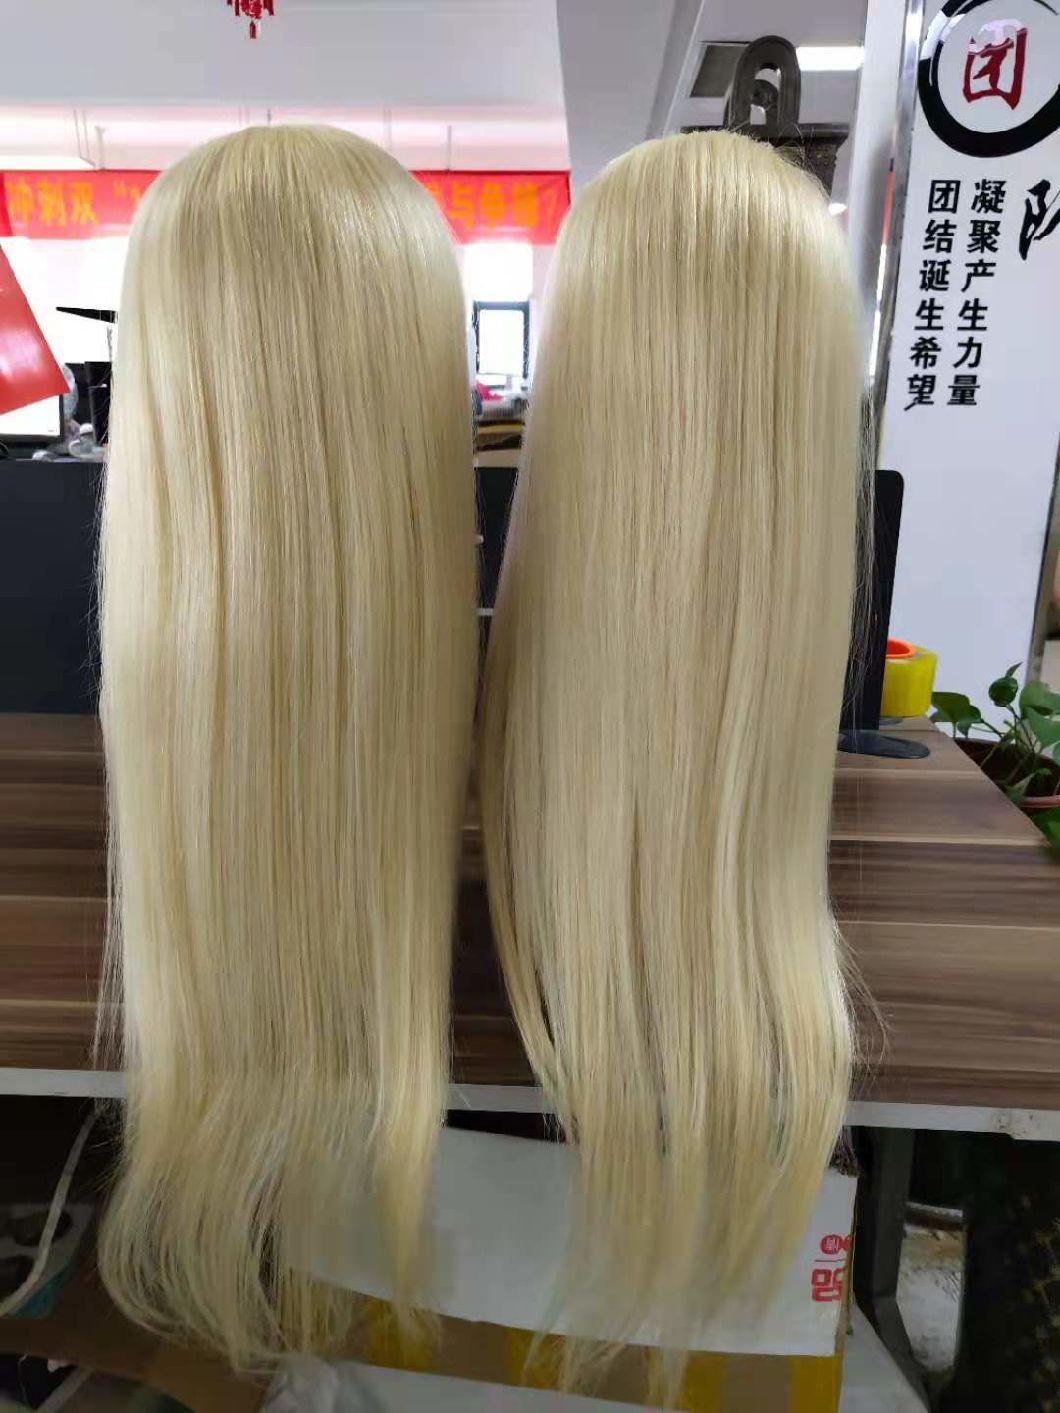 Brazilian Straight 613 Lace Front Wig 150% Density 13X4 Straight Honey Blonde Lace Front Human Hair Wigs for Women